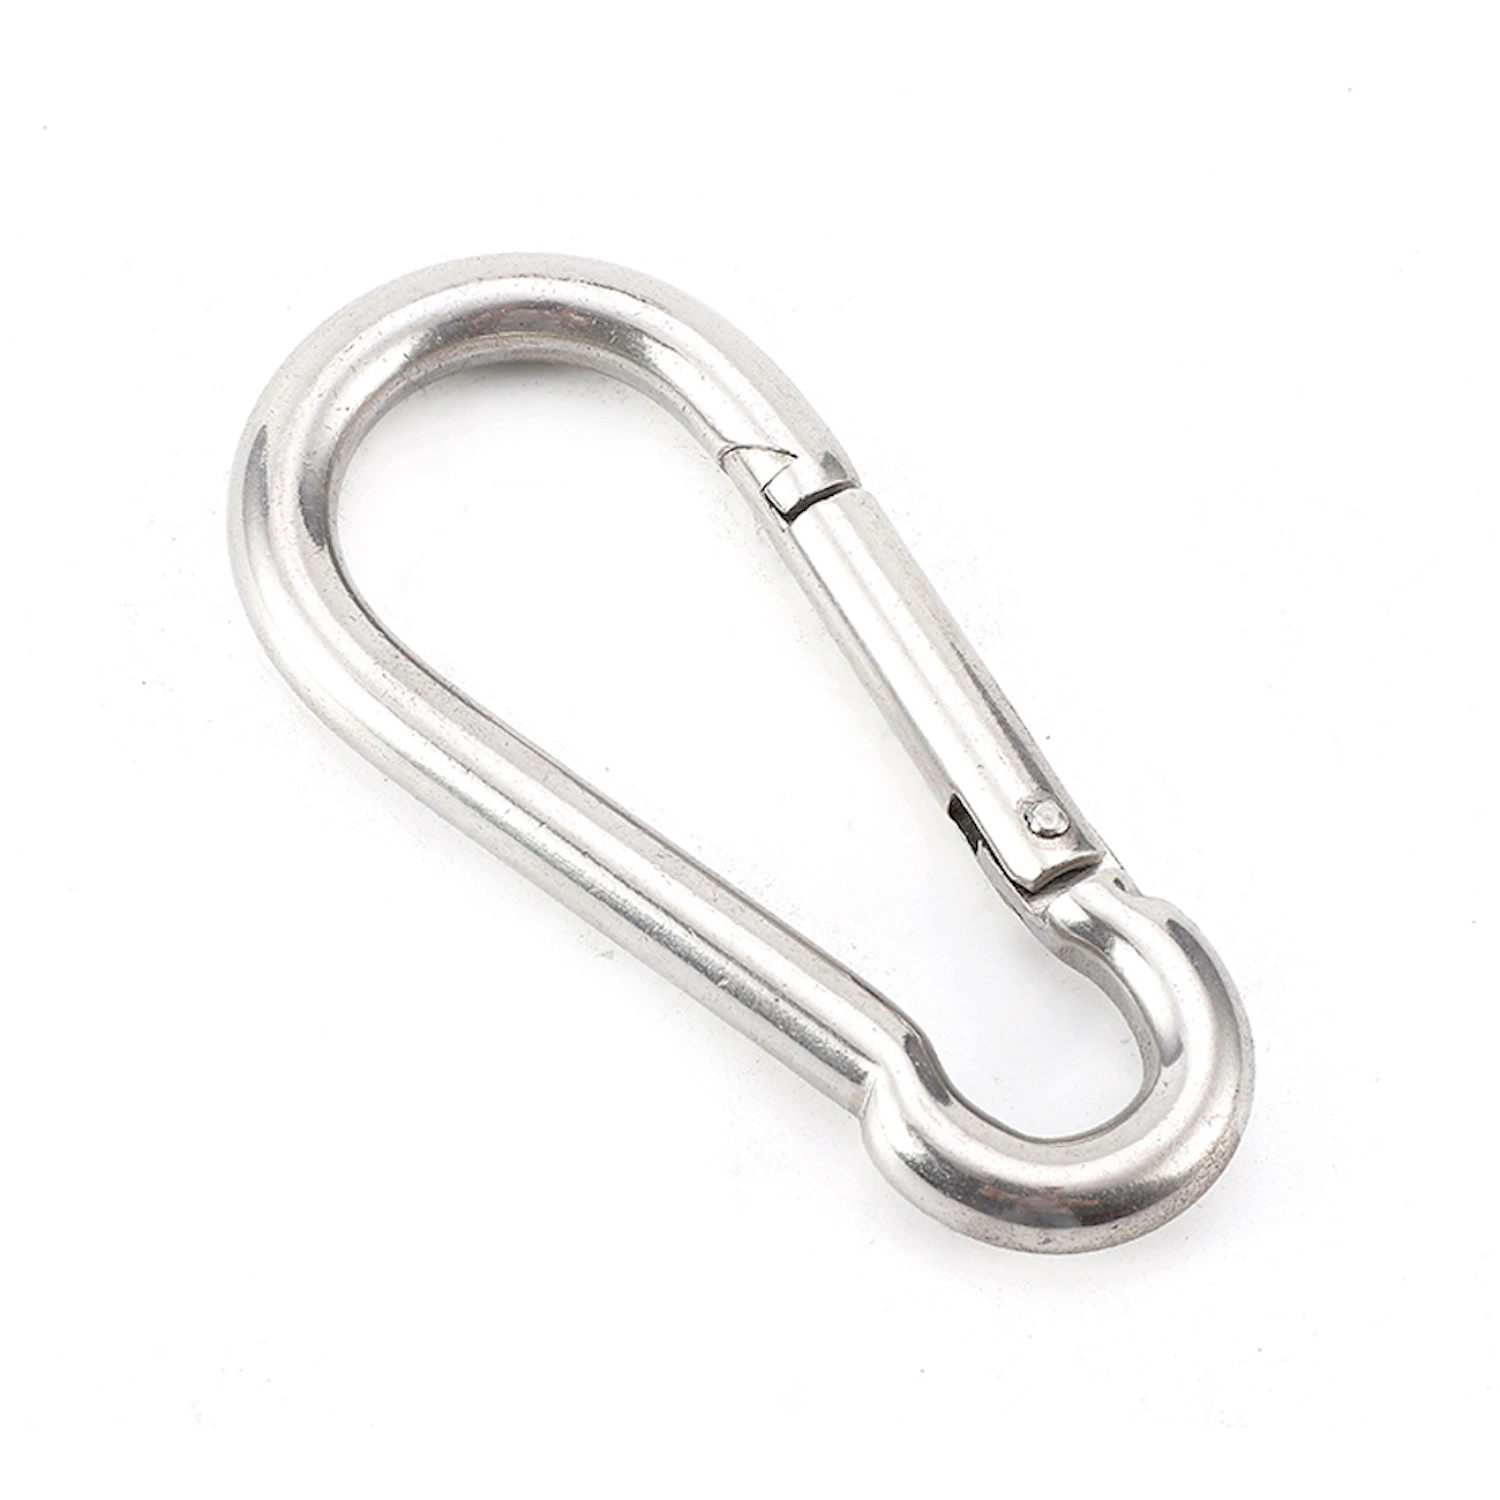 Stainless Steel Wire Rope Rigging Accessories Hardware Spring Snap Hook